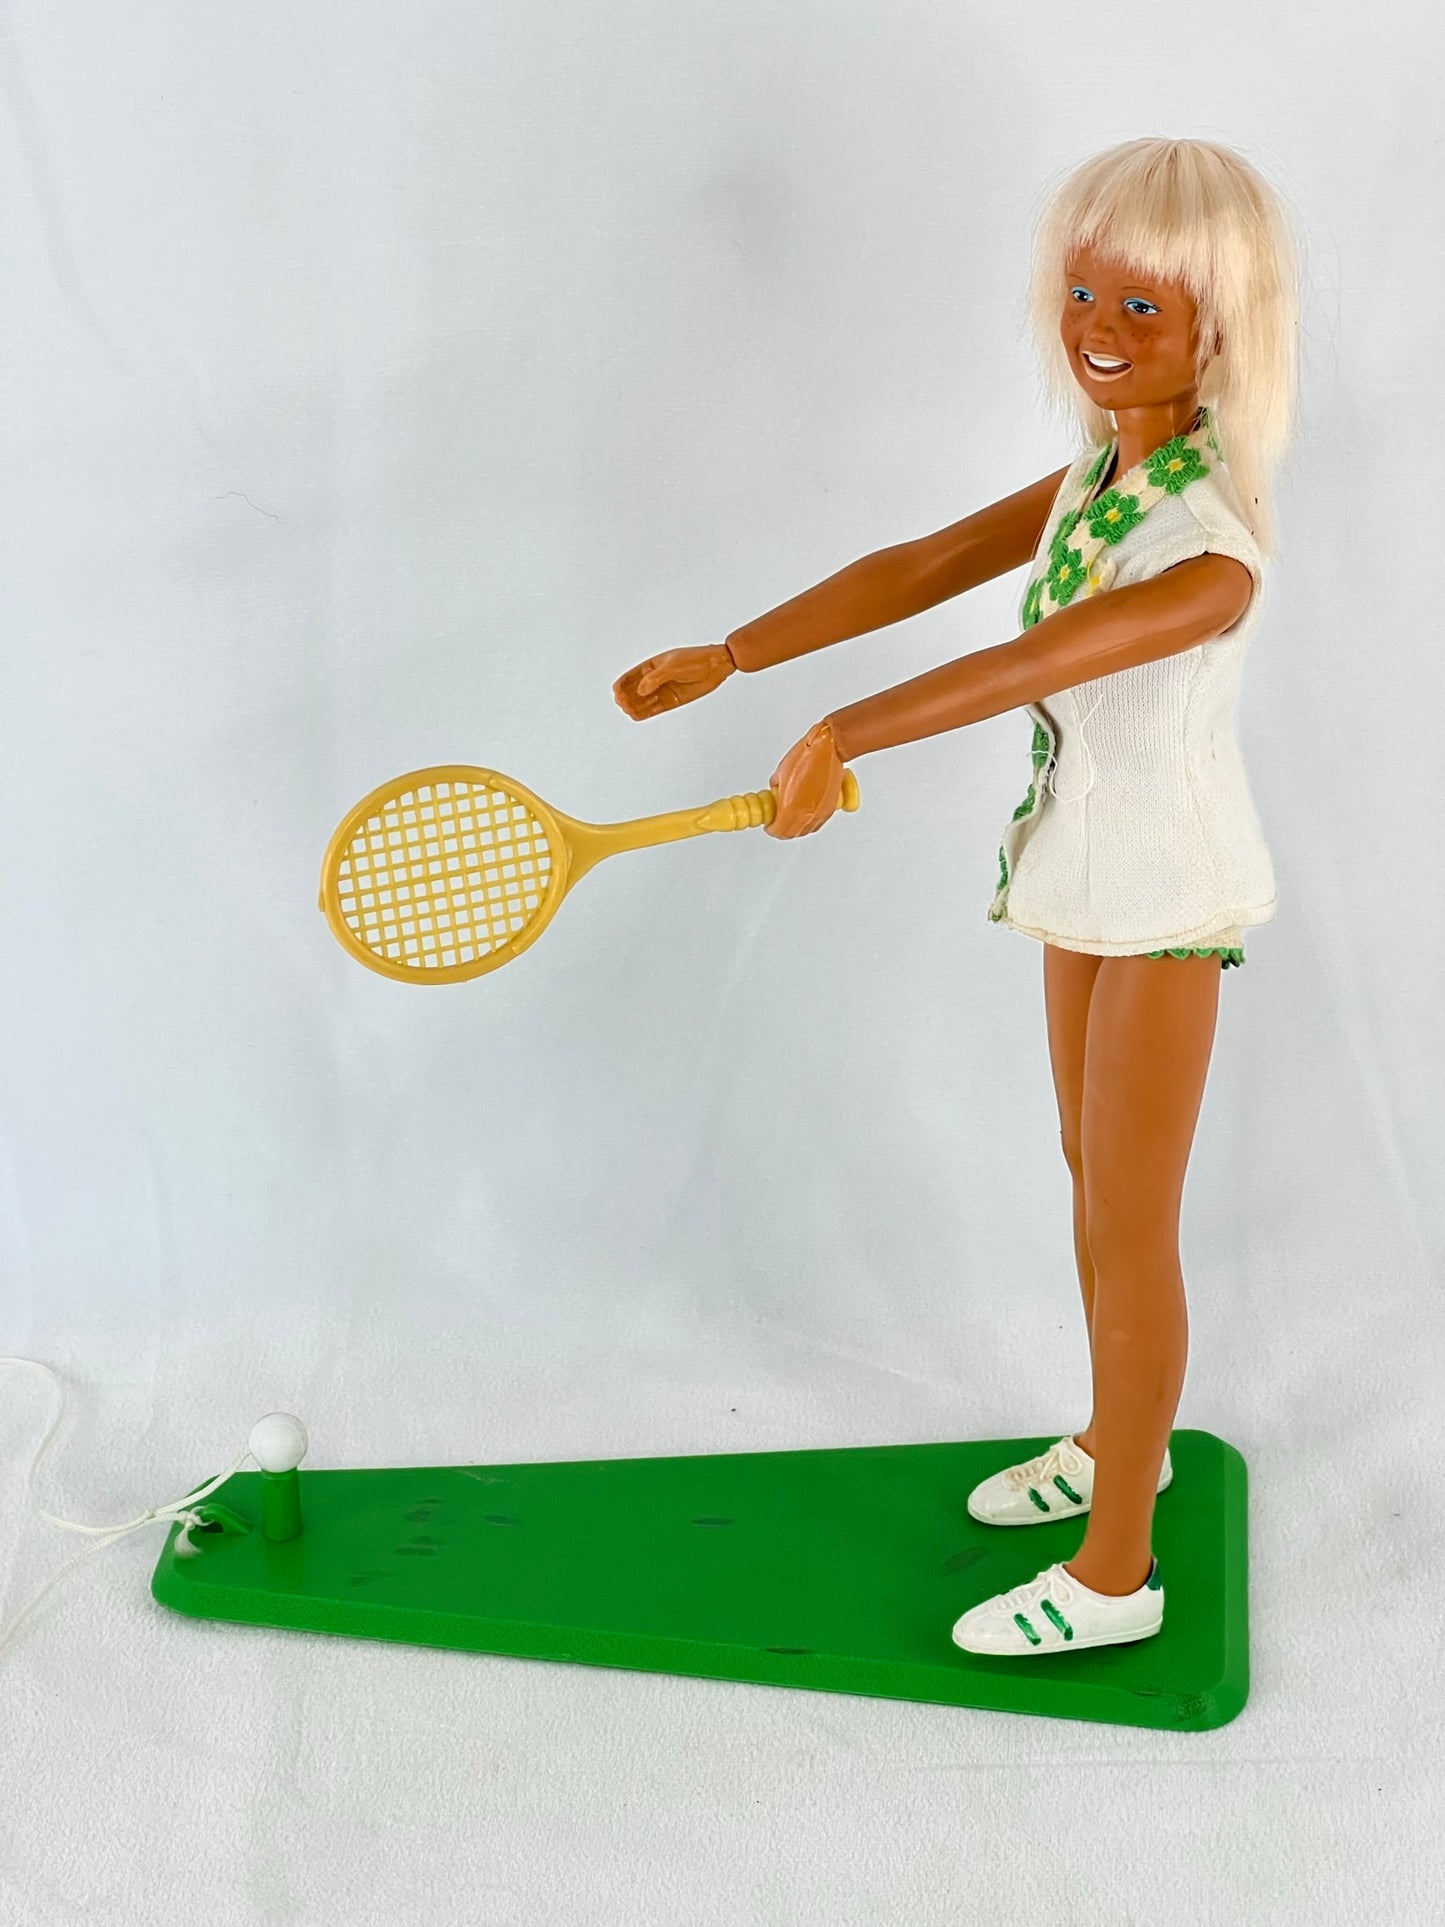 1974 Barbie Vintage Kenner Dusty Doll Bend Twist And Turn in Original Outfit with Her Tennis Accessories DE 3093